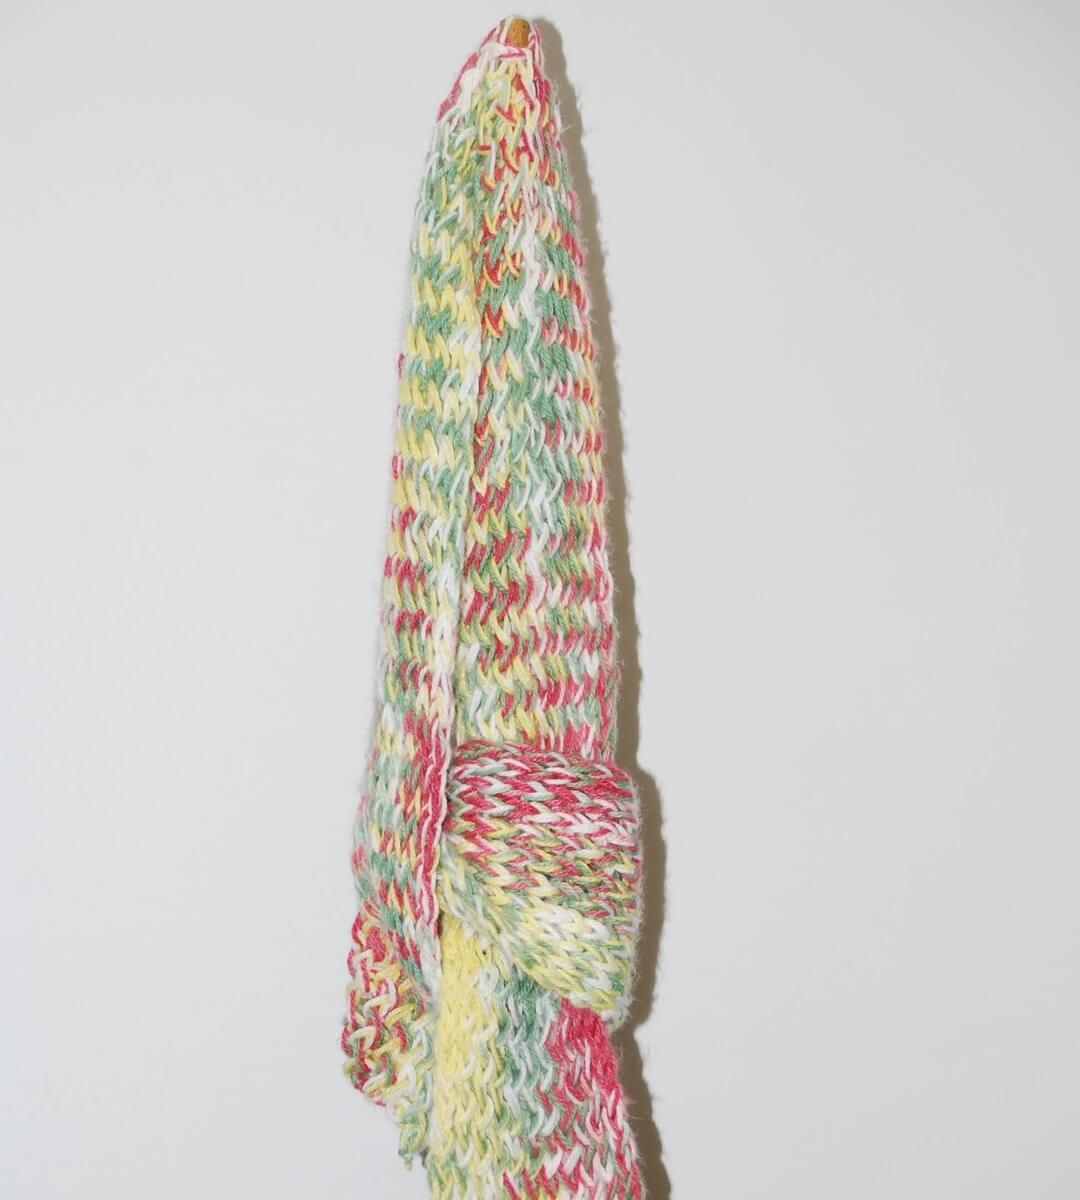 5 ft x 5 in, soft multicolored scarf.